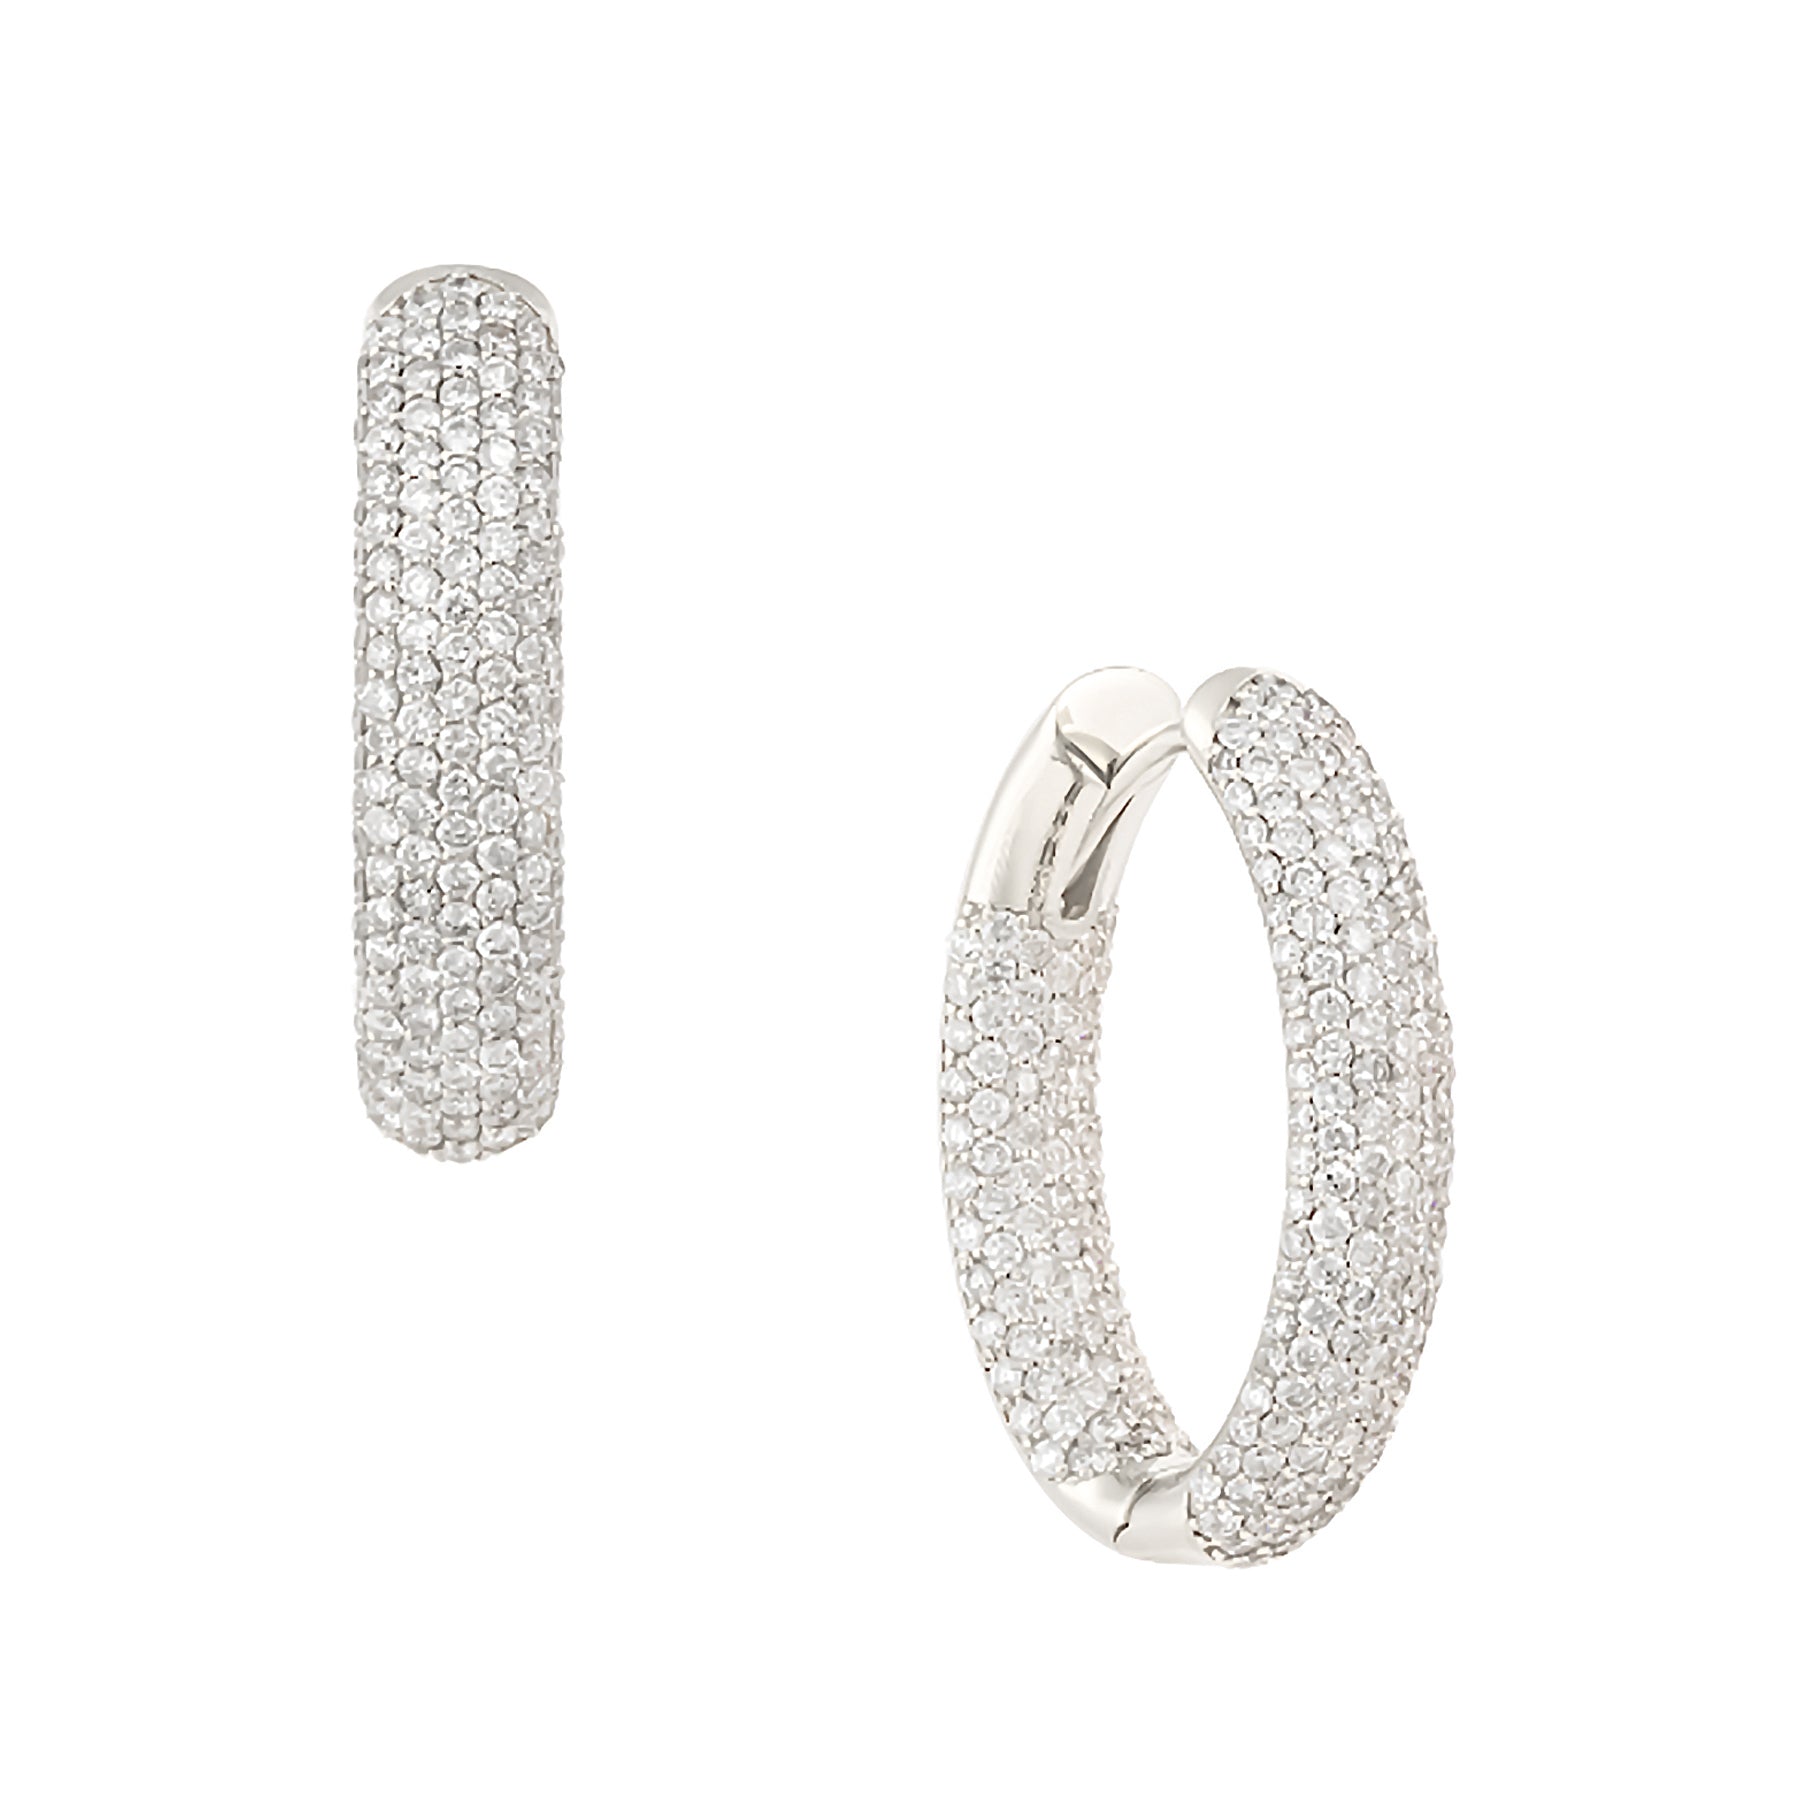 Pave Dome Medium Hoops